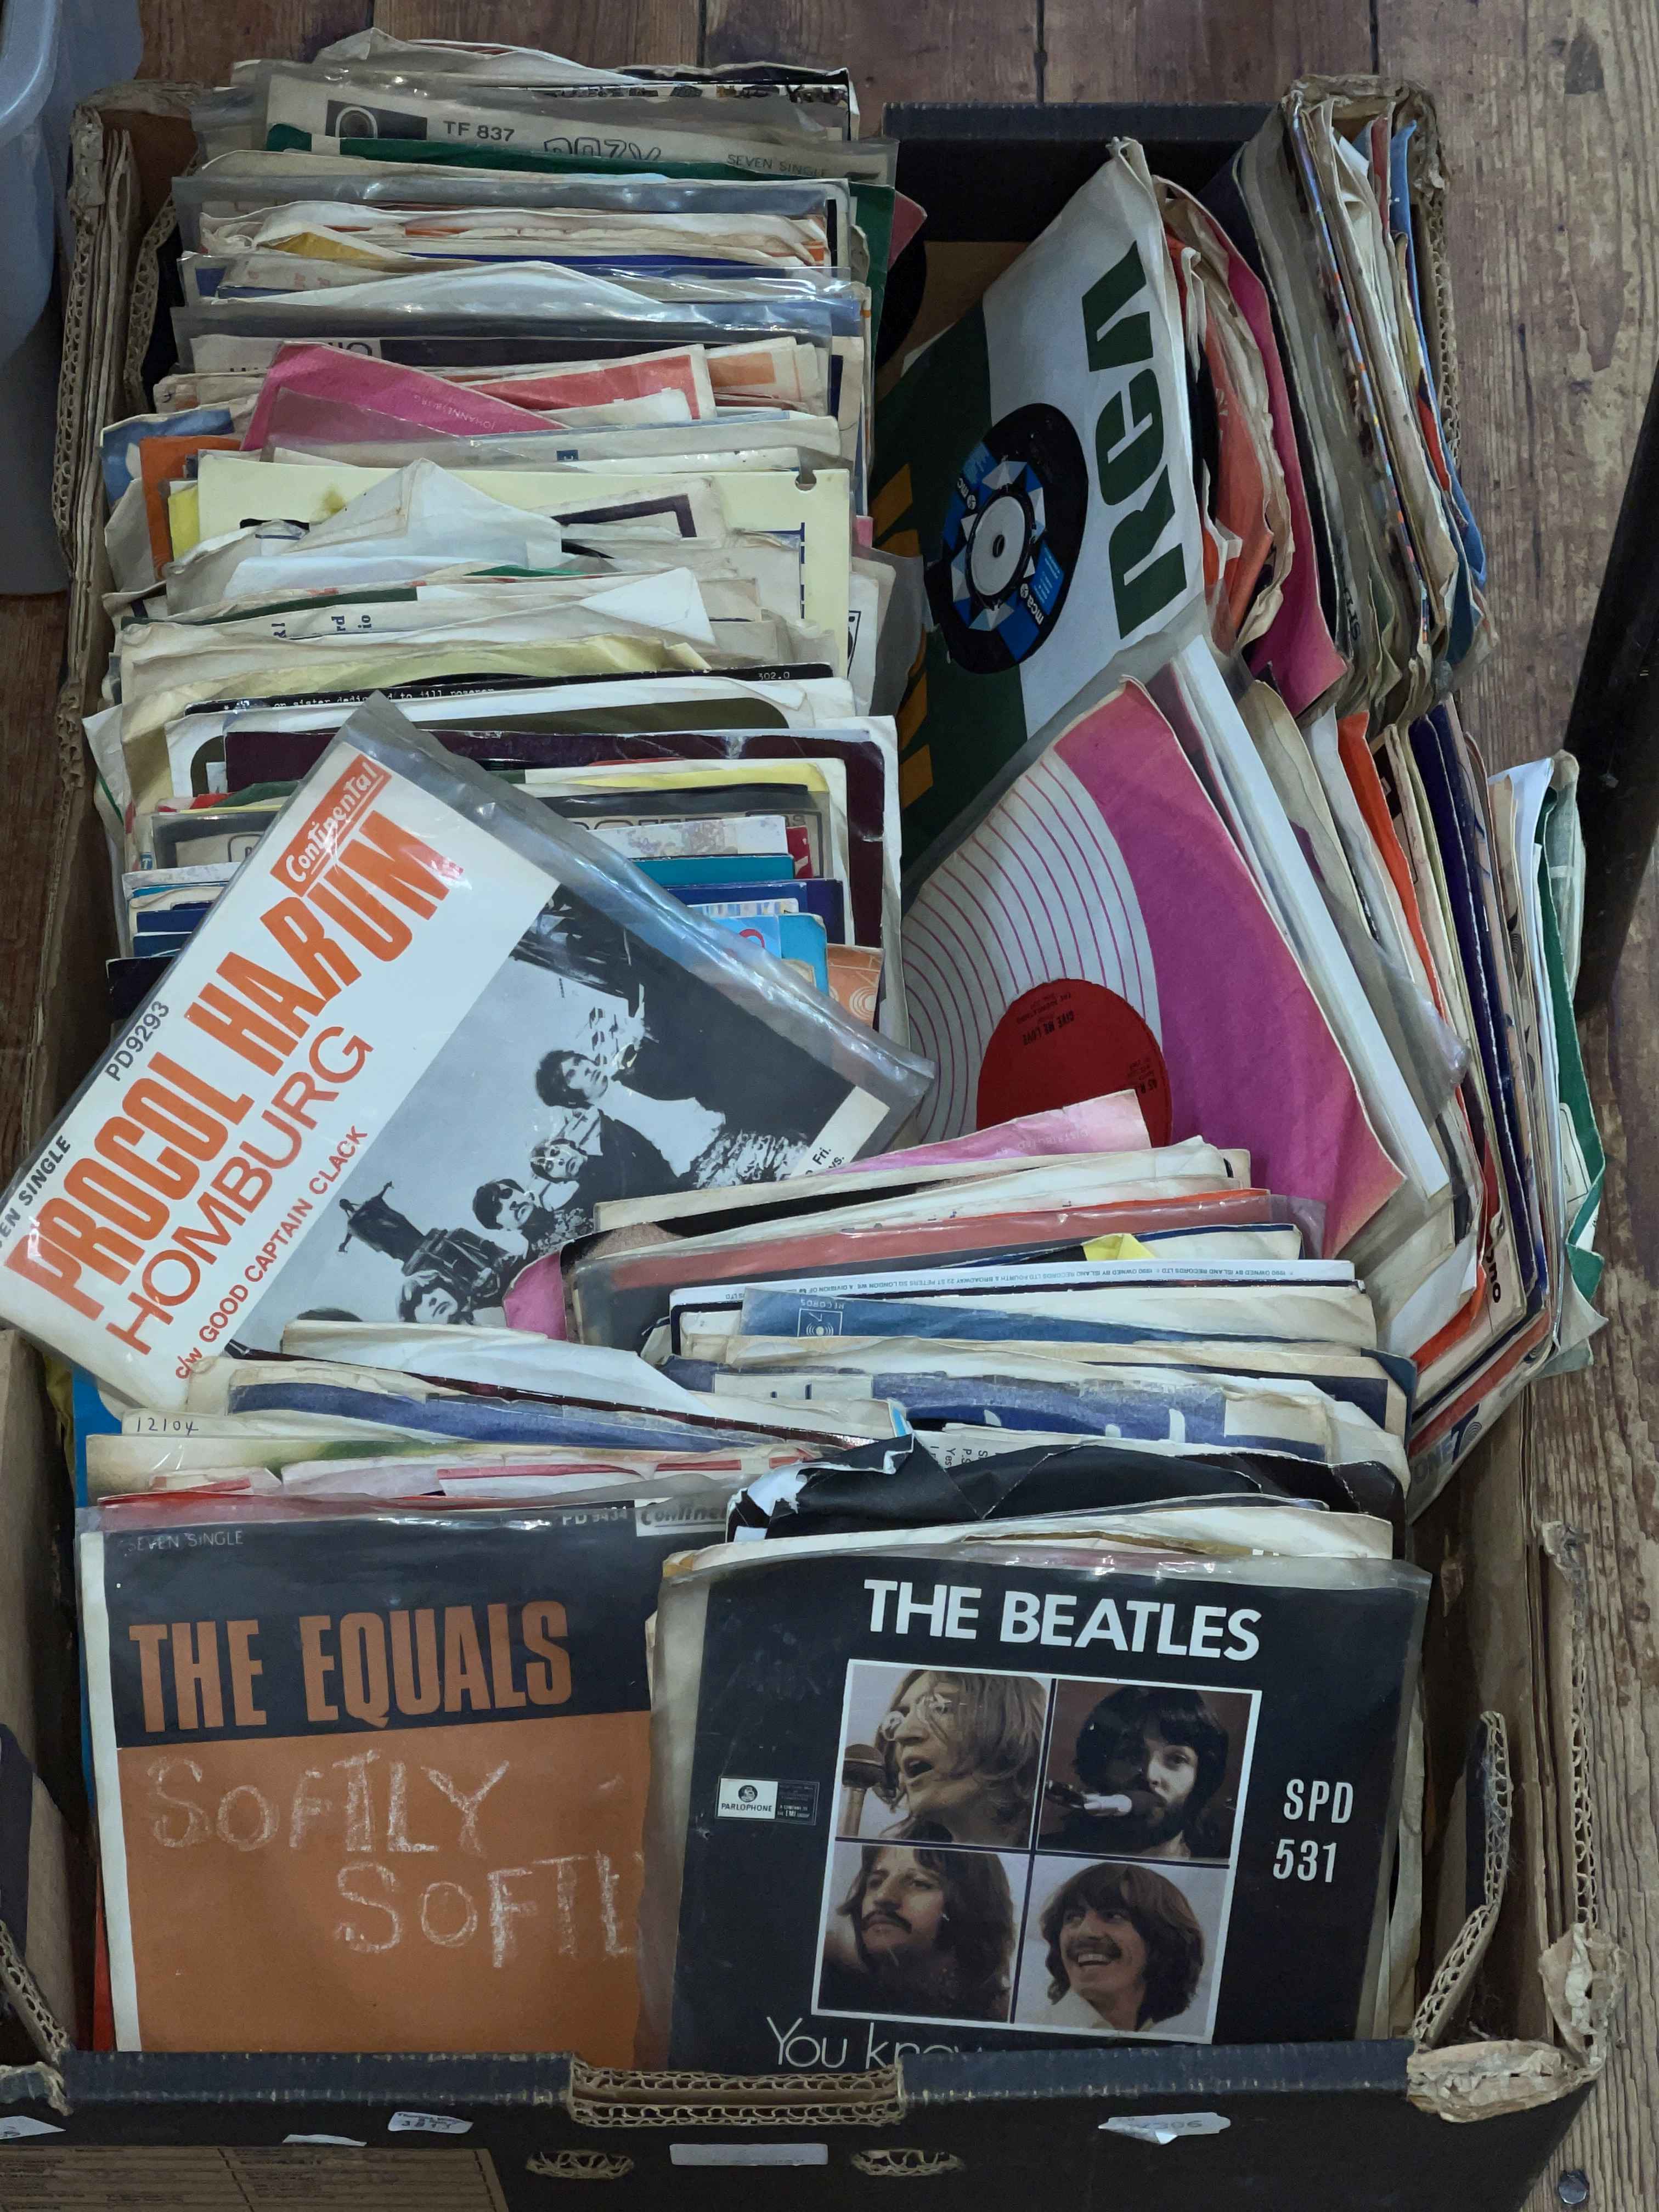 Box of single records including The Beatles.